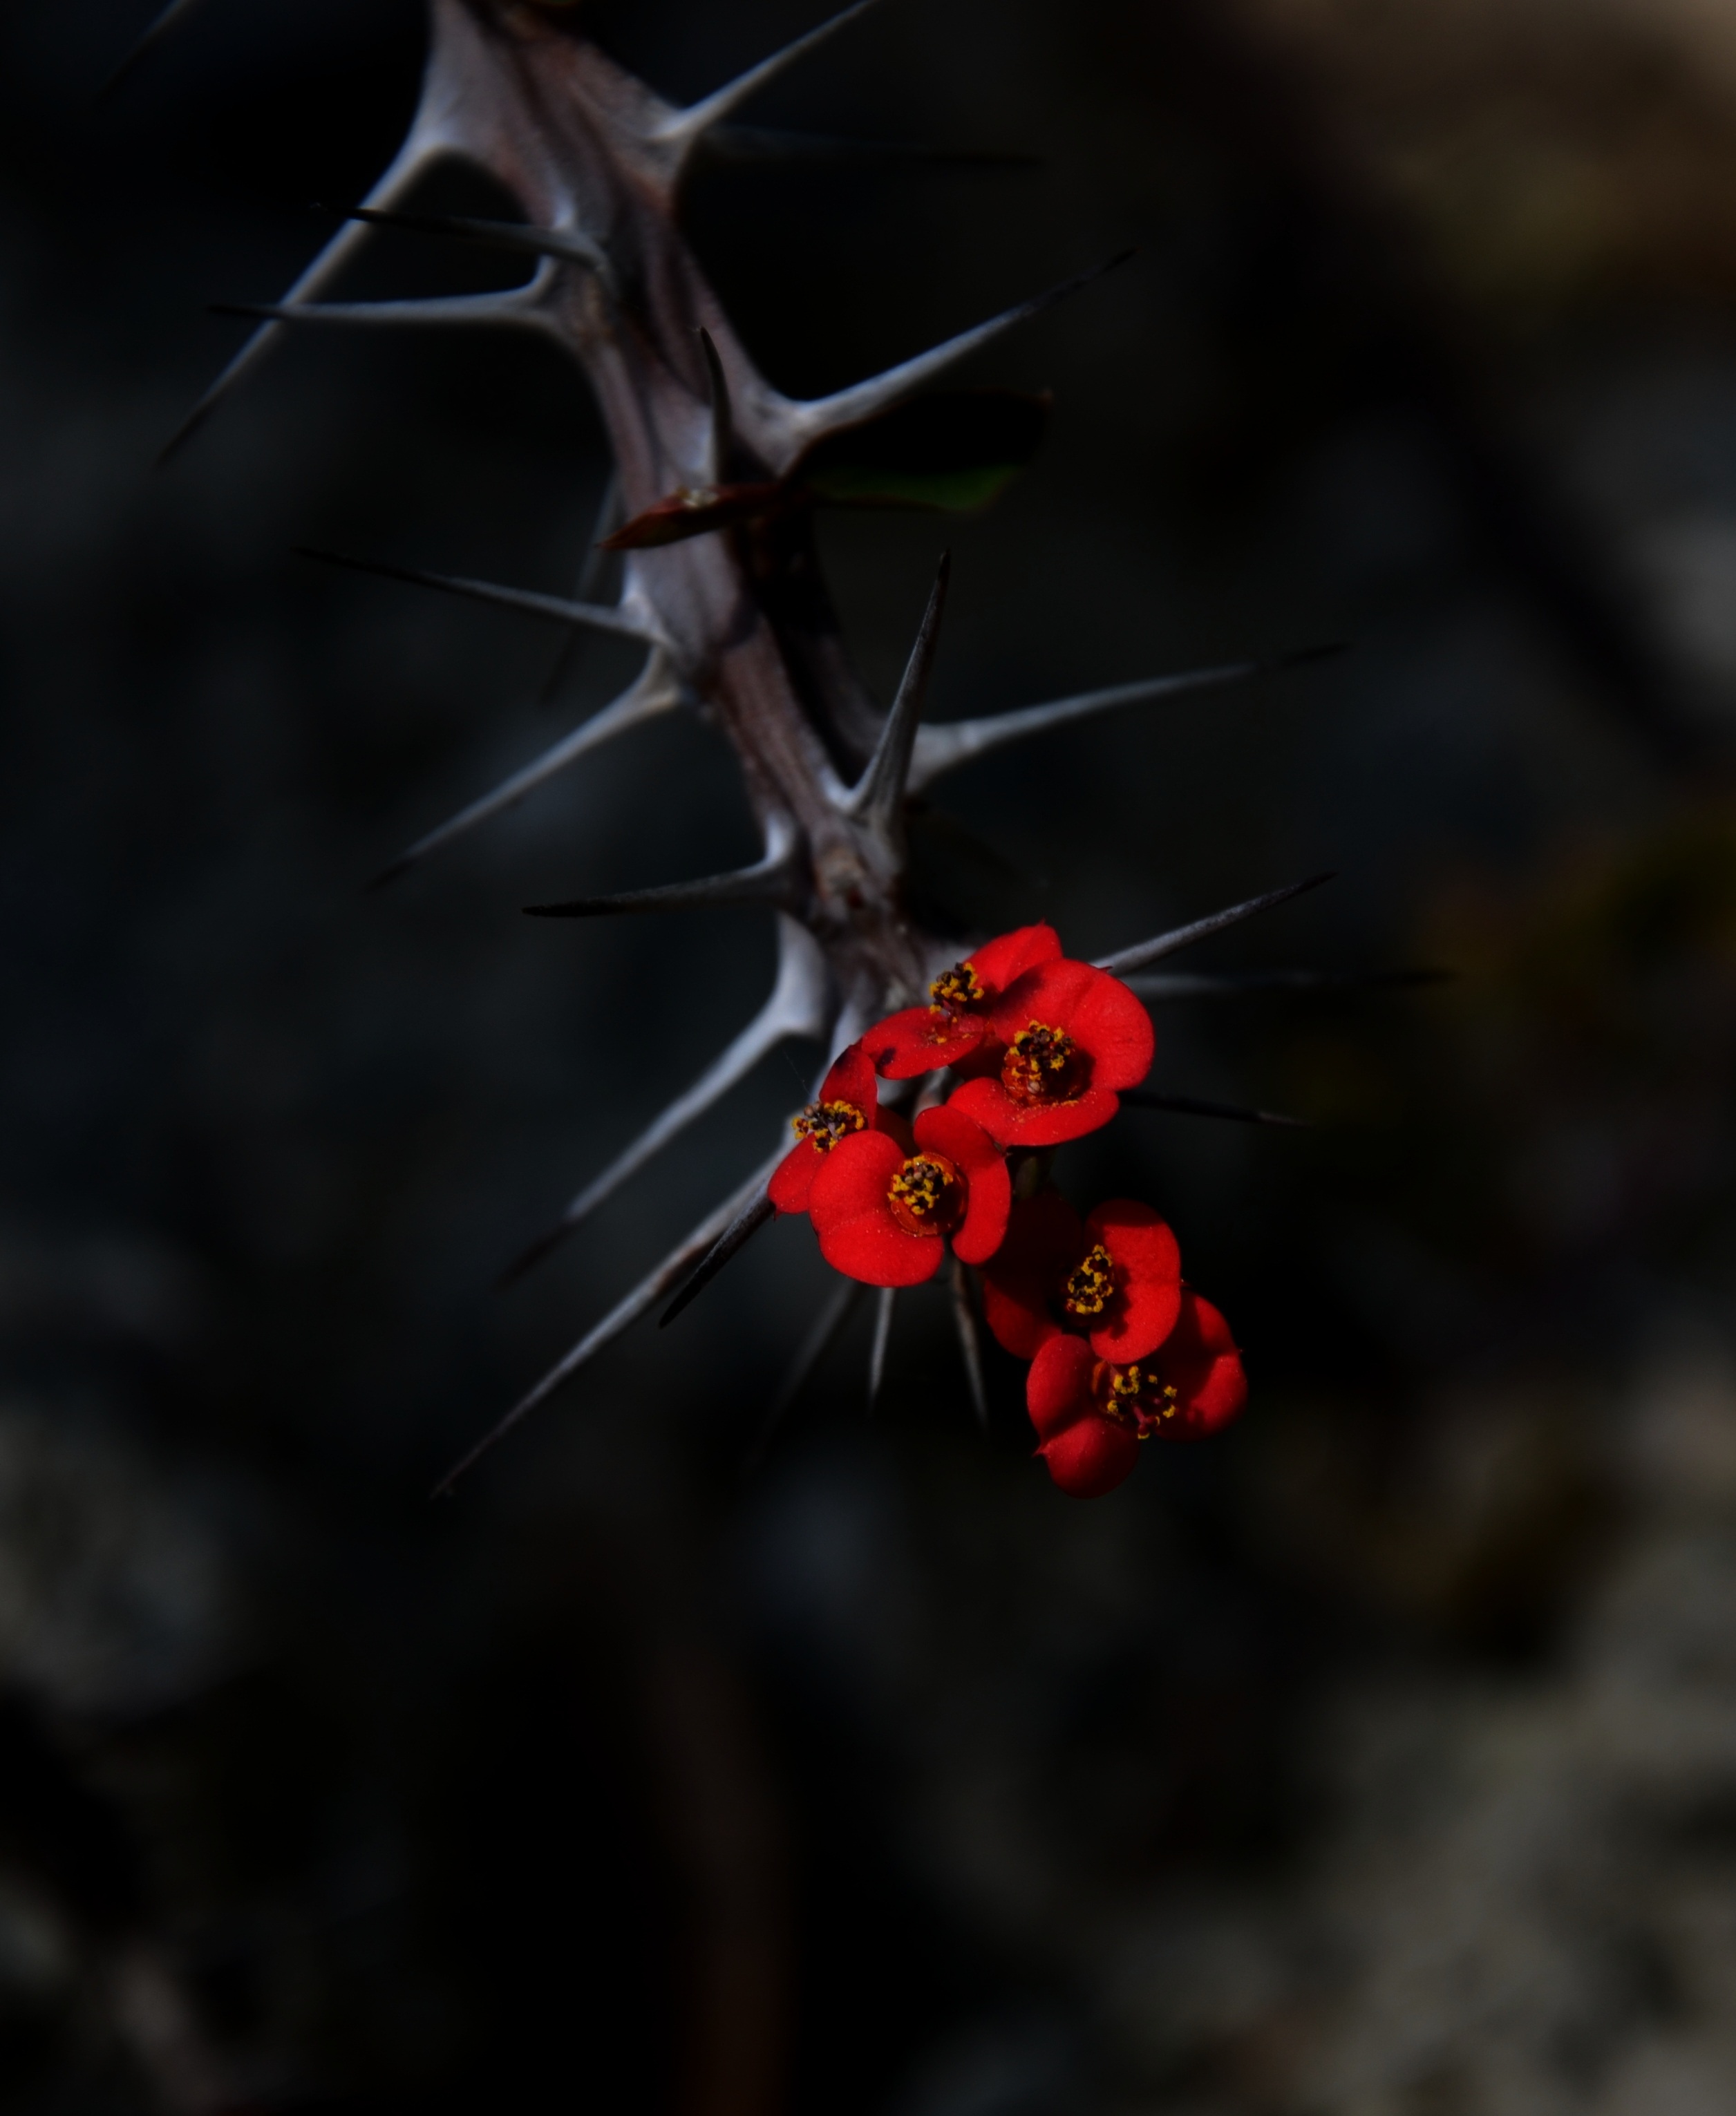 88810 download wallpaper flowers, needle, red, macro, blur, smooth, thorns, prickles, spikes screensavers and pictures for free